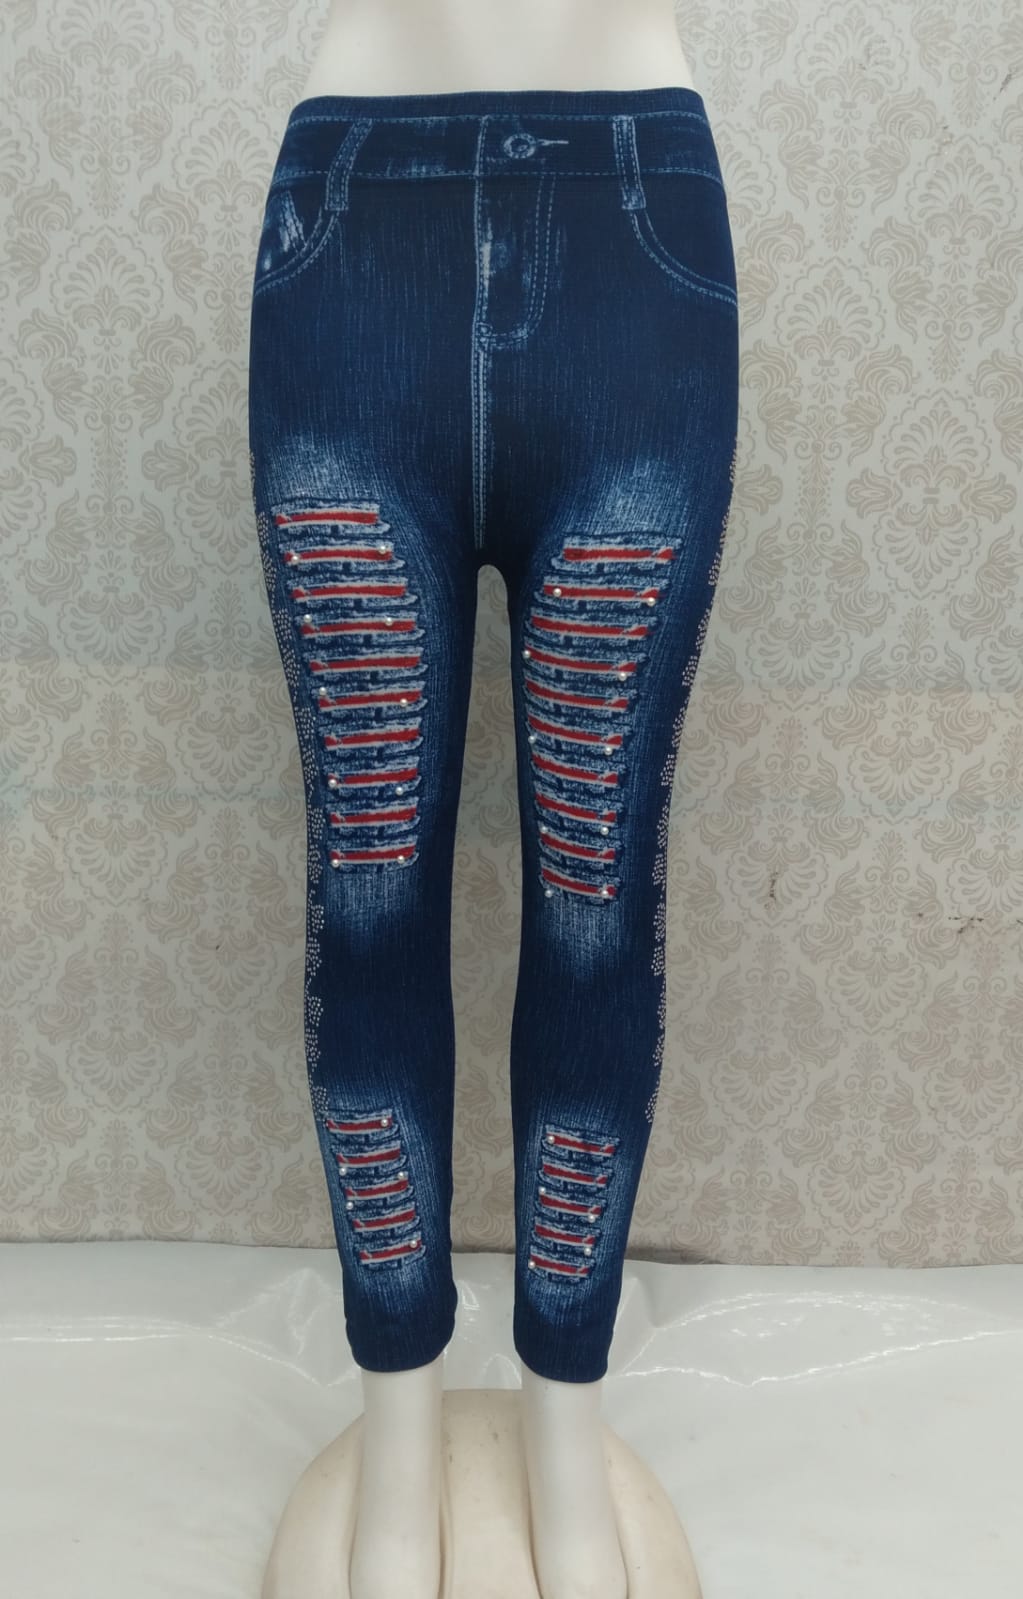 Buy High Waist Braided Leggings, Festival Leggings, Torn Leggings, Slashed  Leggings, Cut Out Leggings, Distressed Leggings, Ripped Tights Online in  India - Etsy